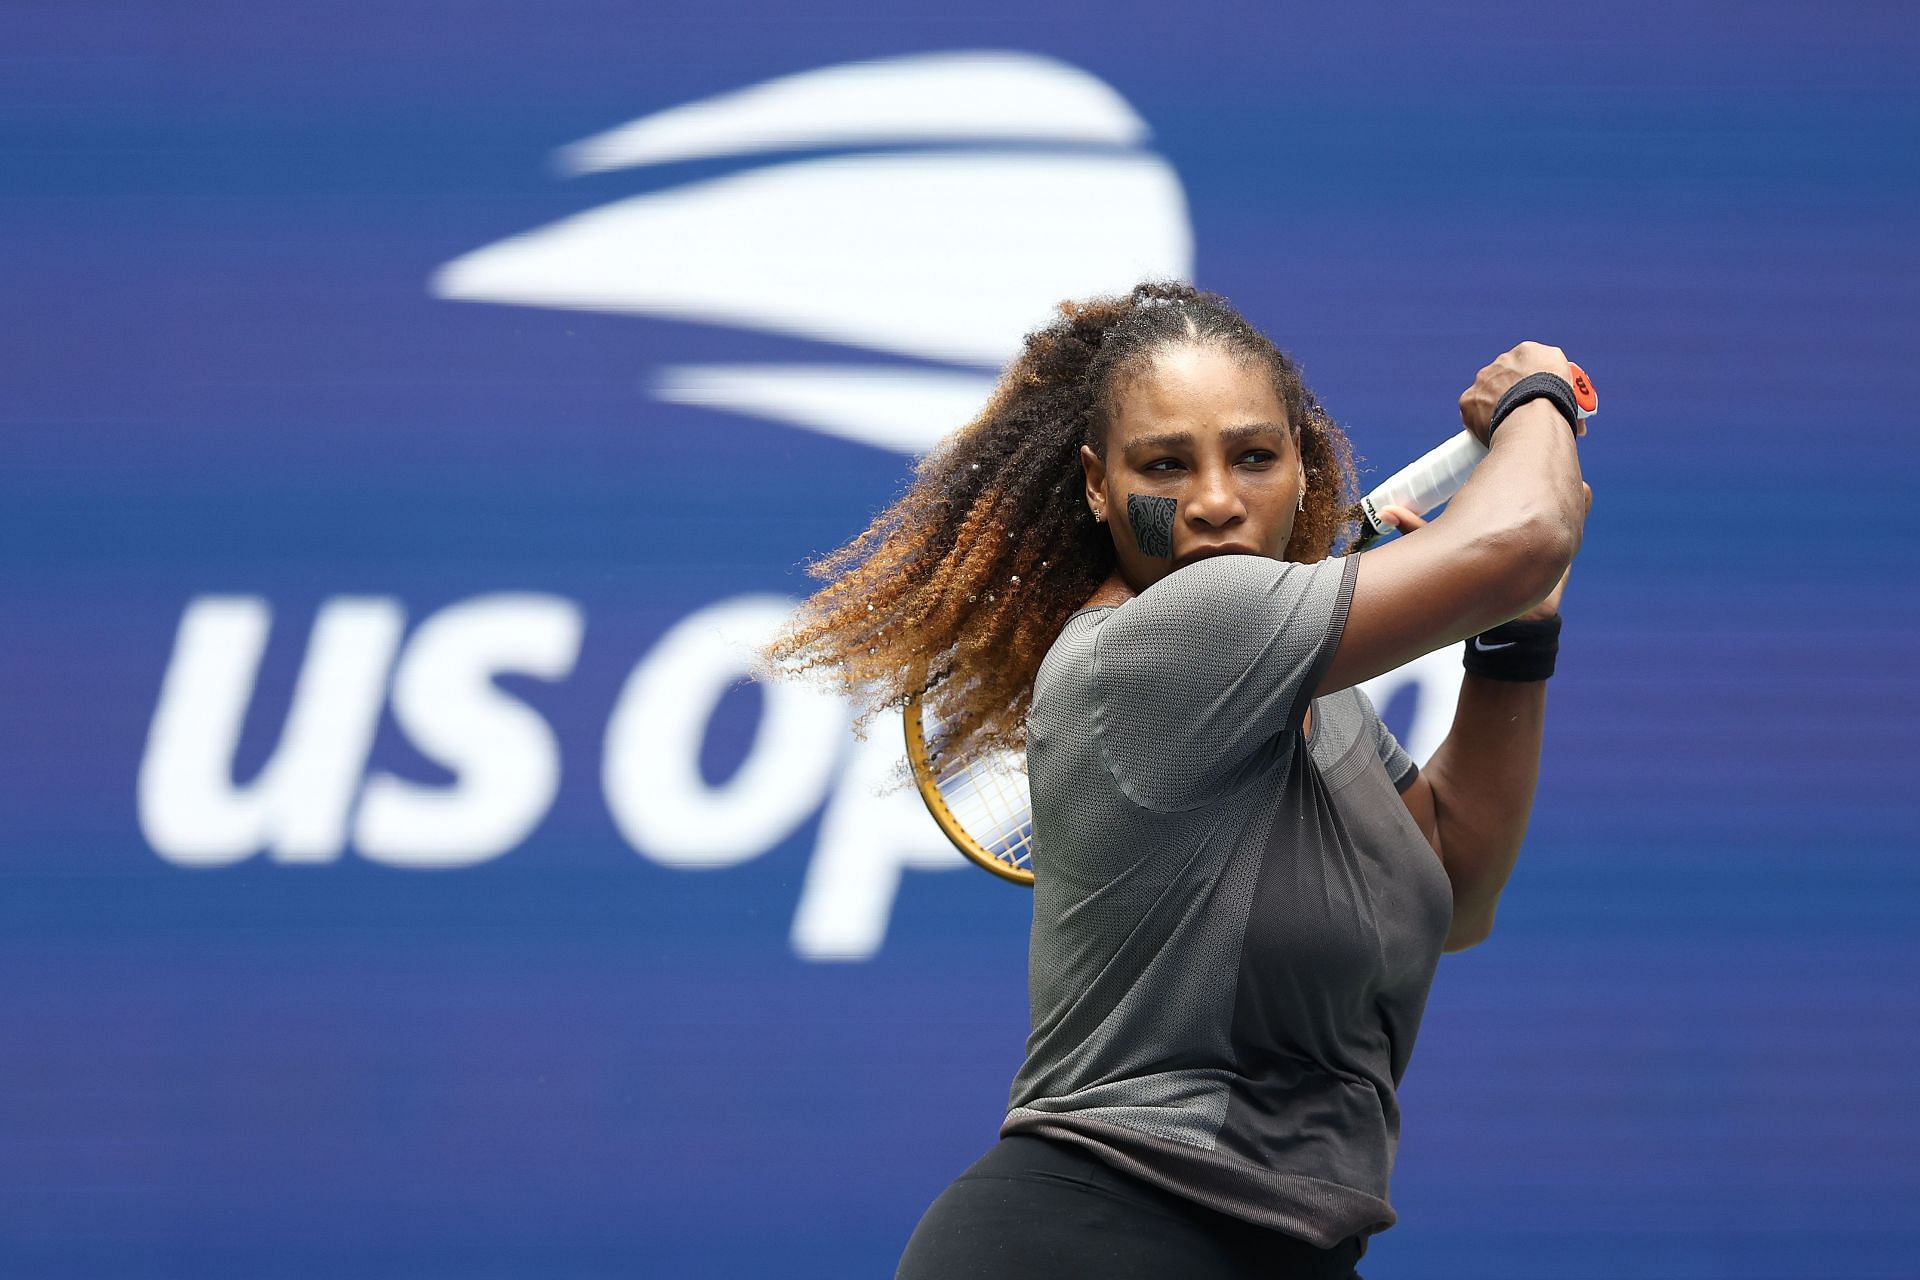 Serena Williams will be up against Danka Kovinic in the opening round of the US Open